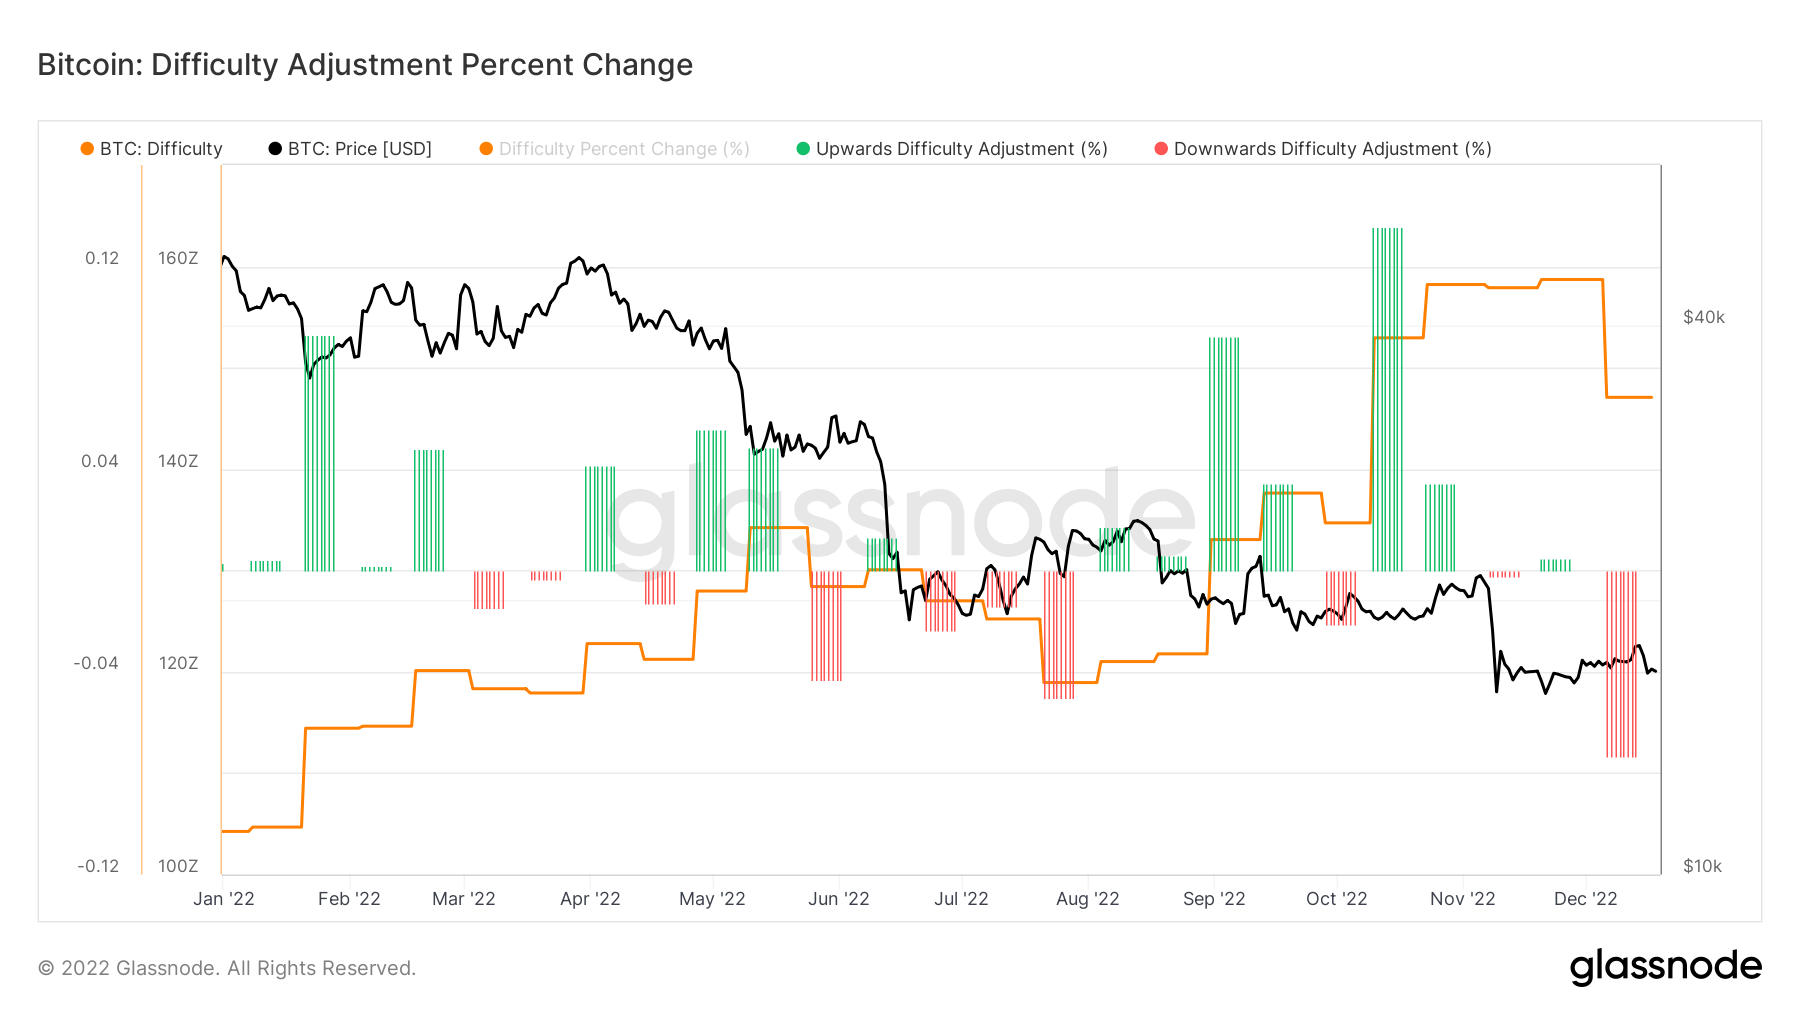 Bitcoin difficulty adjustments